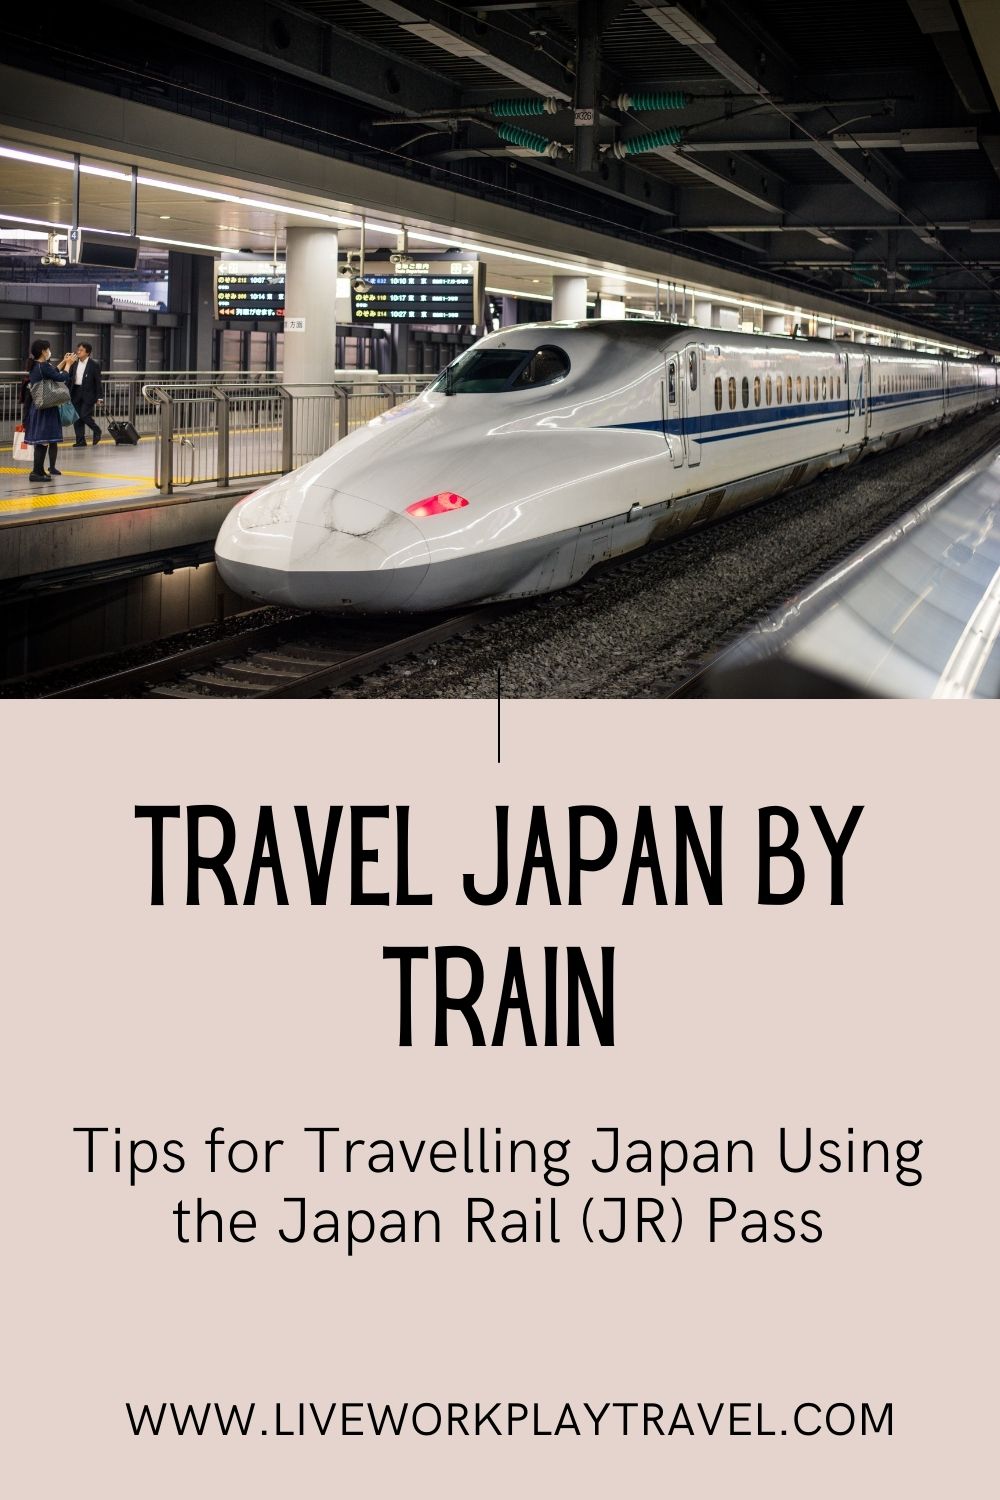 Travel Japan by Train Using The Japan Rail JR Pass. It Is The Fastest And Most Convenient Way To Travel Japan Travelling On Fast Bullet Trains Known As Shinkansen.